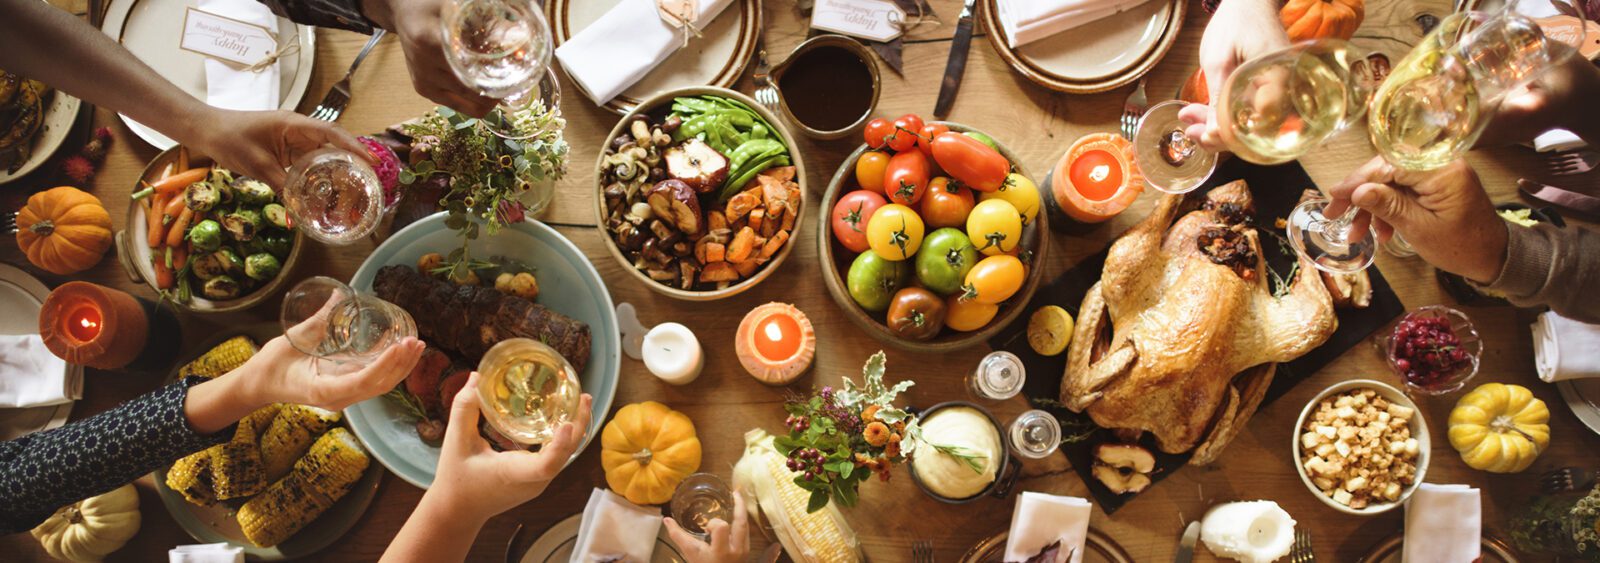 A thanksgiving table spread with tons of food and drink.